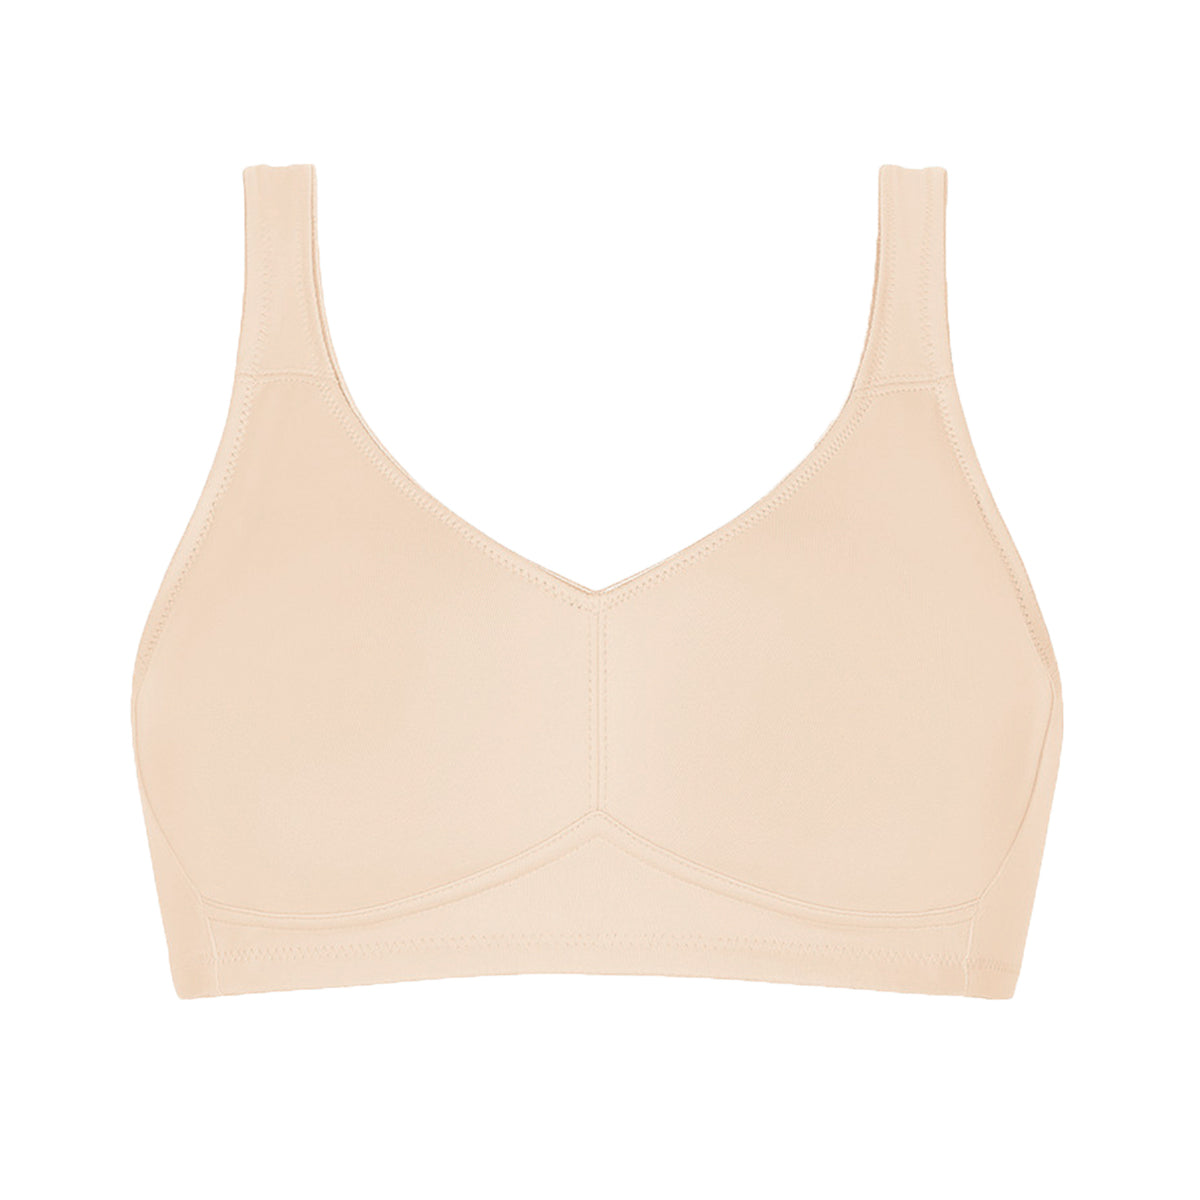 Shop Top Lingerie Brands from Linea Intima